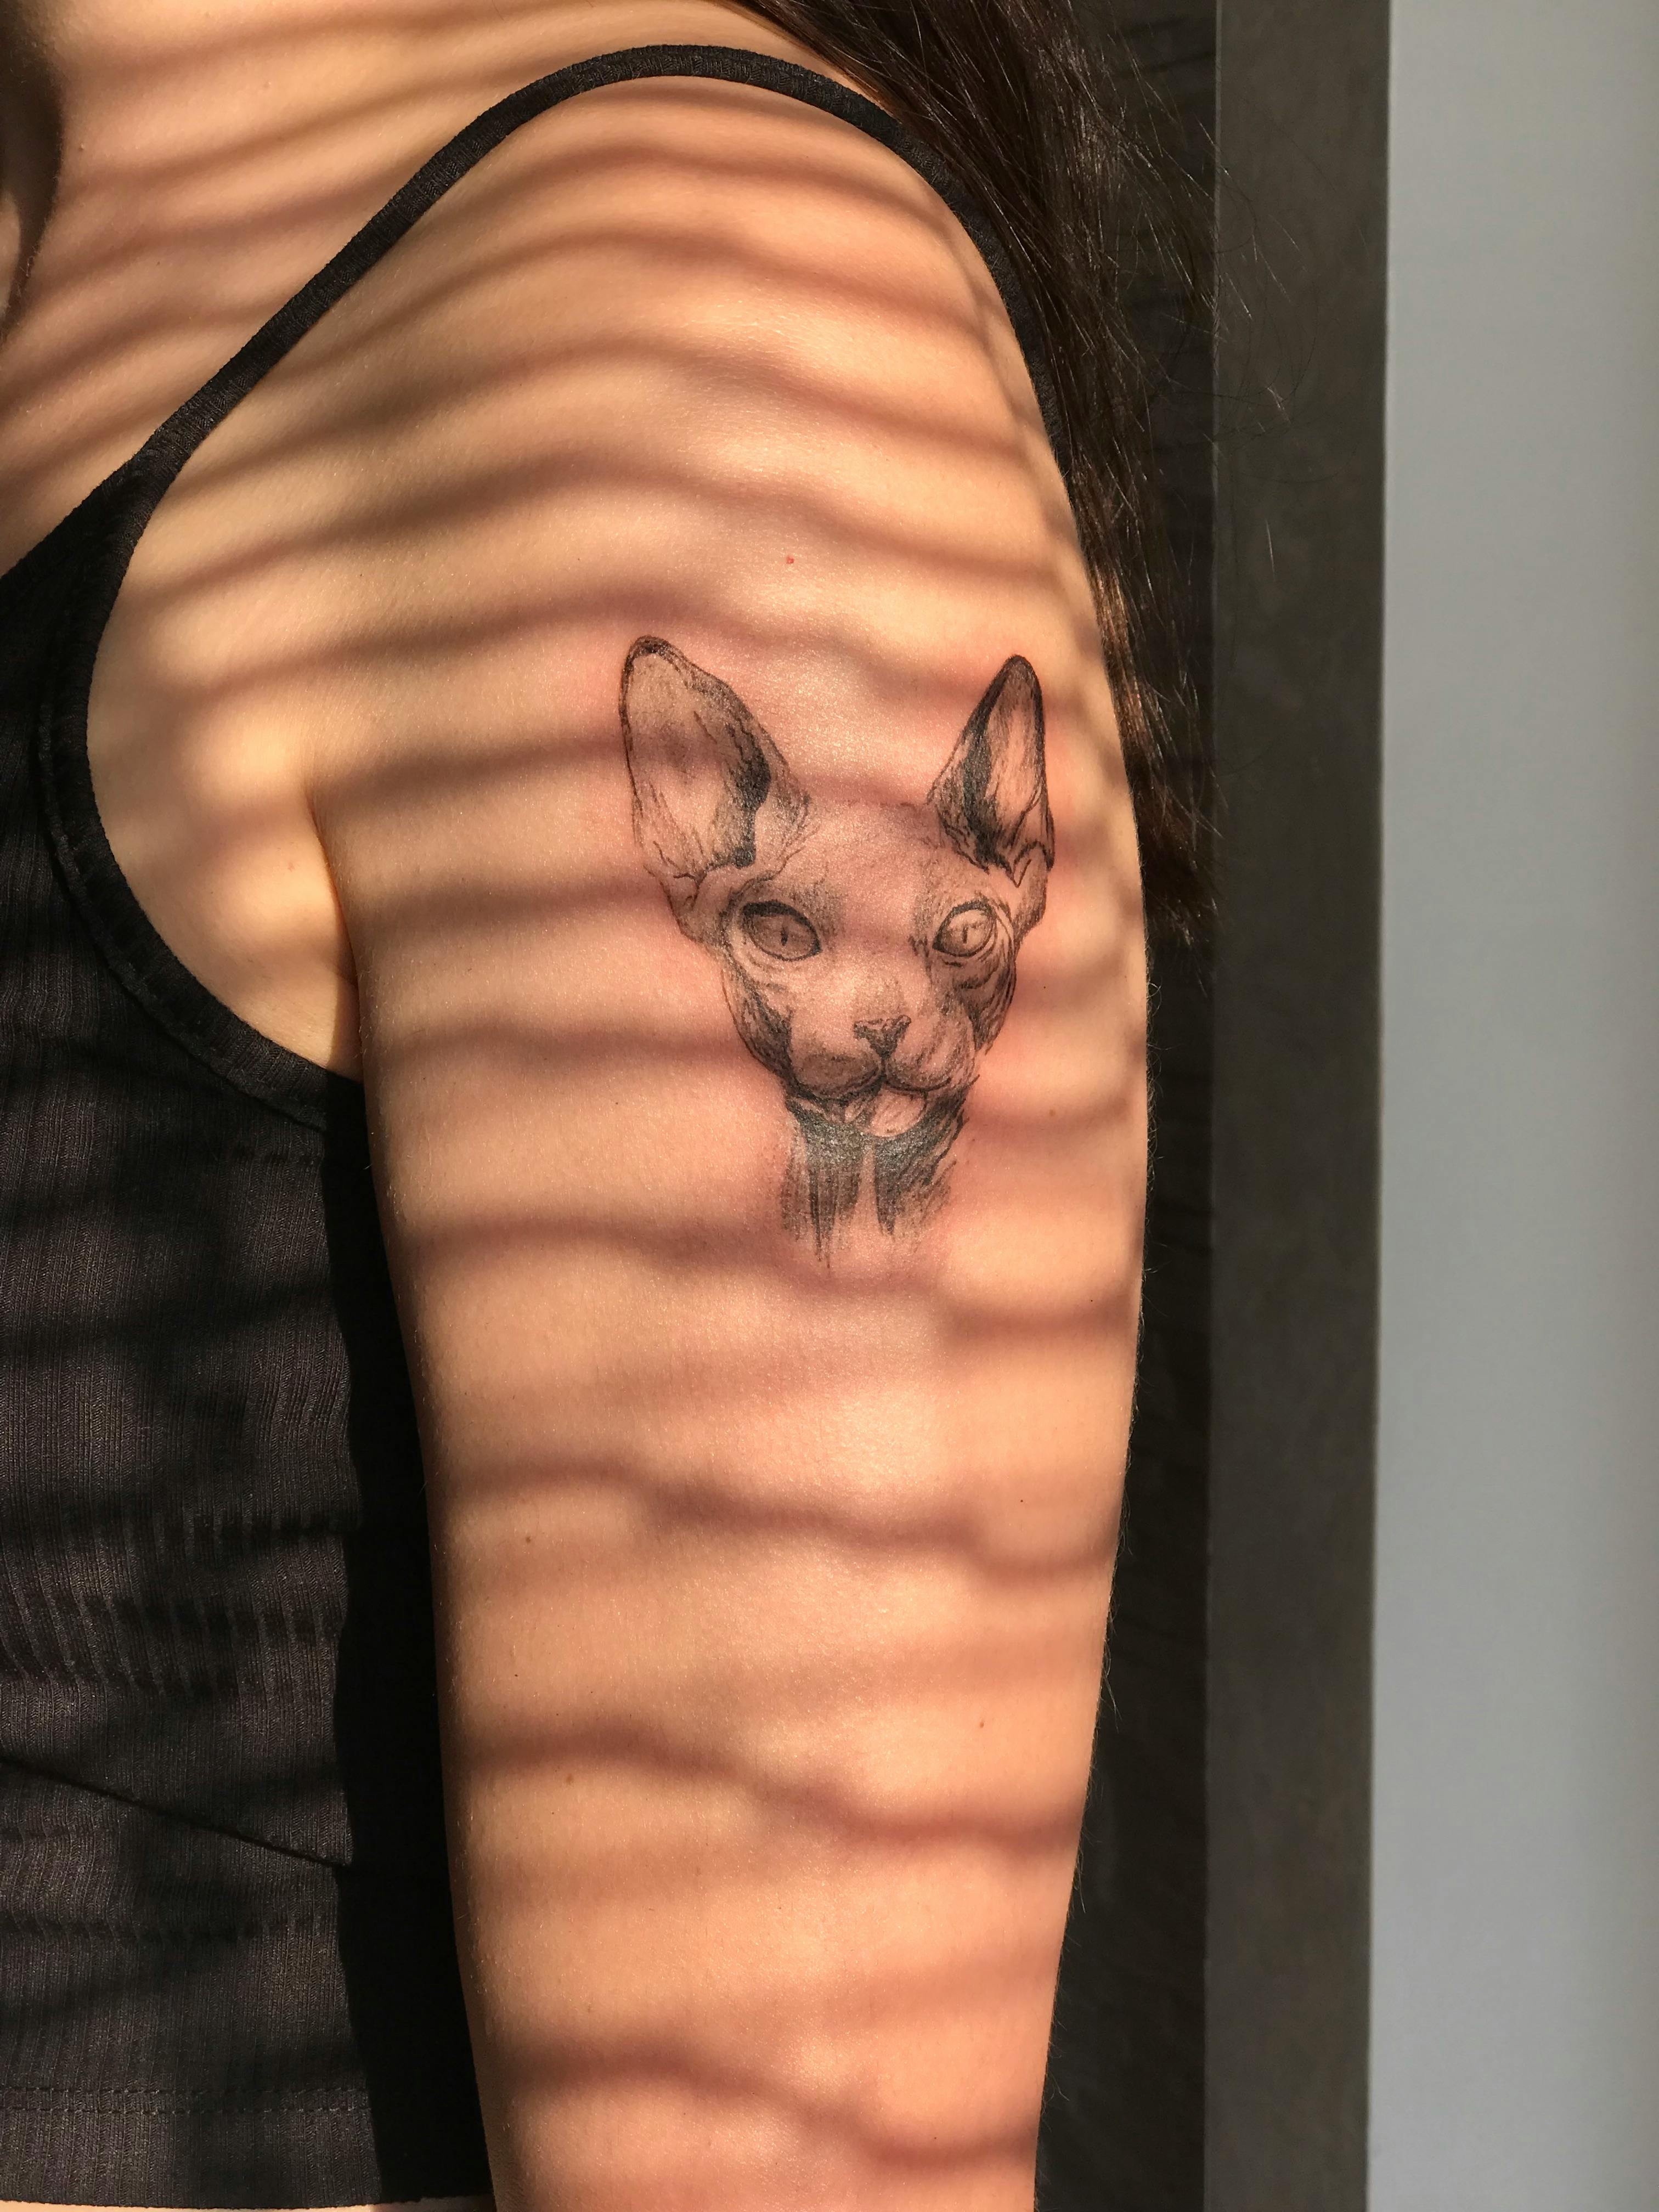 She Got A Tattoo Of A Cat On The Back Of Her Neck In Honor Of Her Late  Sister, But Her Boyfriend Said It Was “Ugly” And That He Didn't Find Her